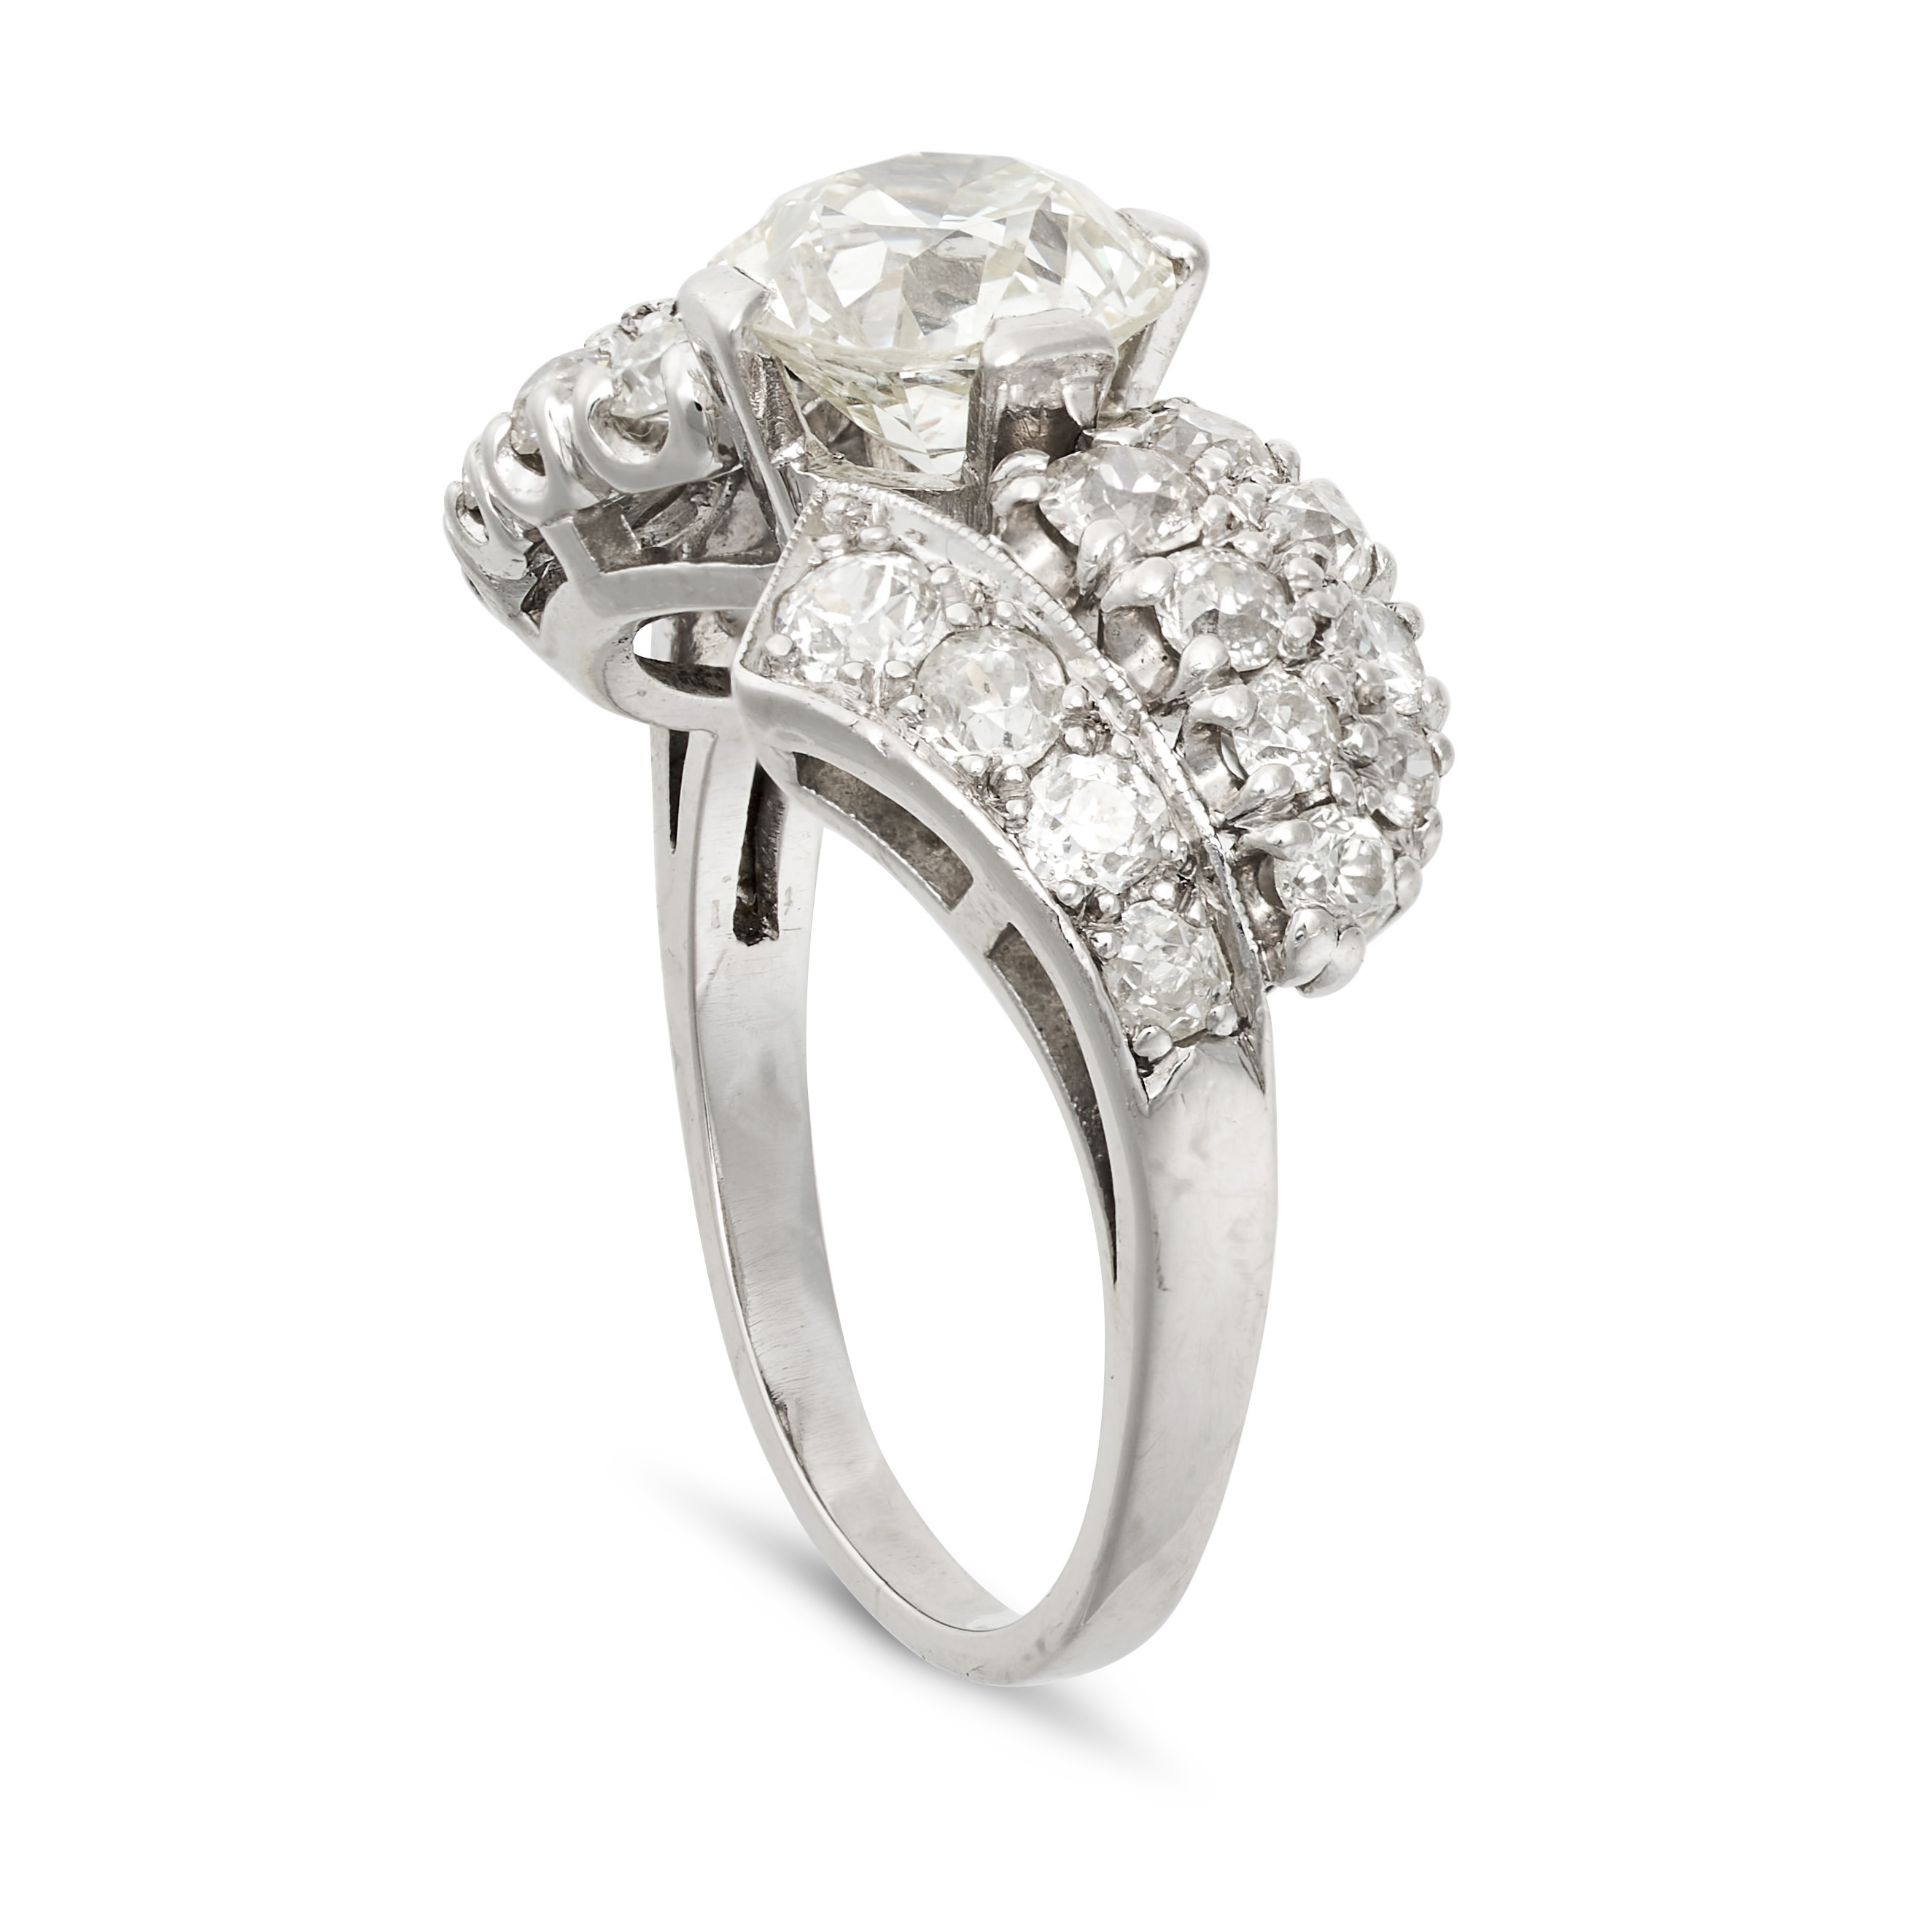 A VINTAGE DIAMOND RING set with an old European cut diamond of approximately 2.00 carats accented... - Image 2 of 2